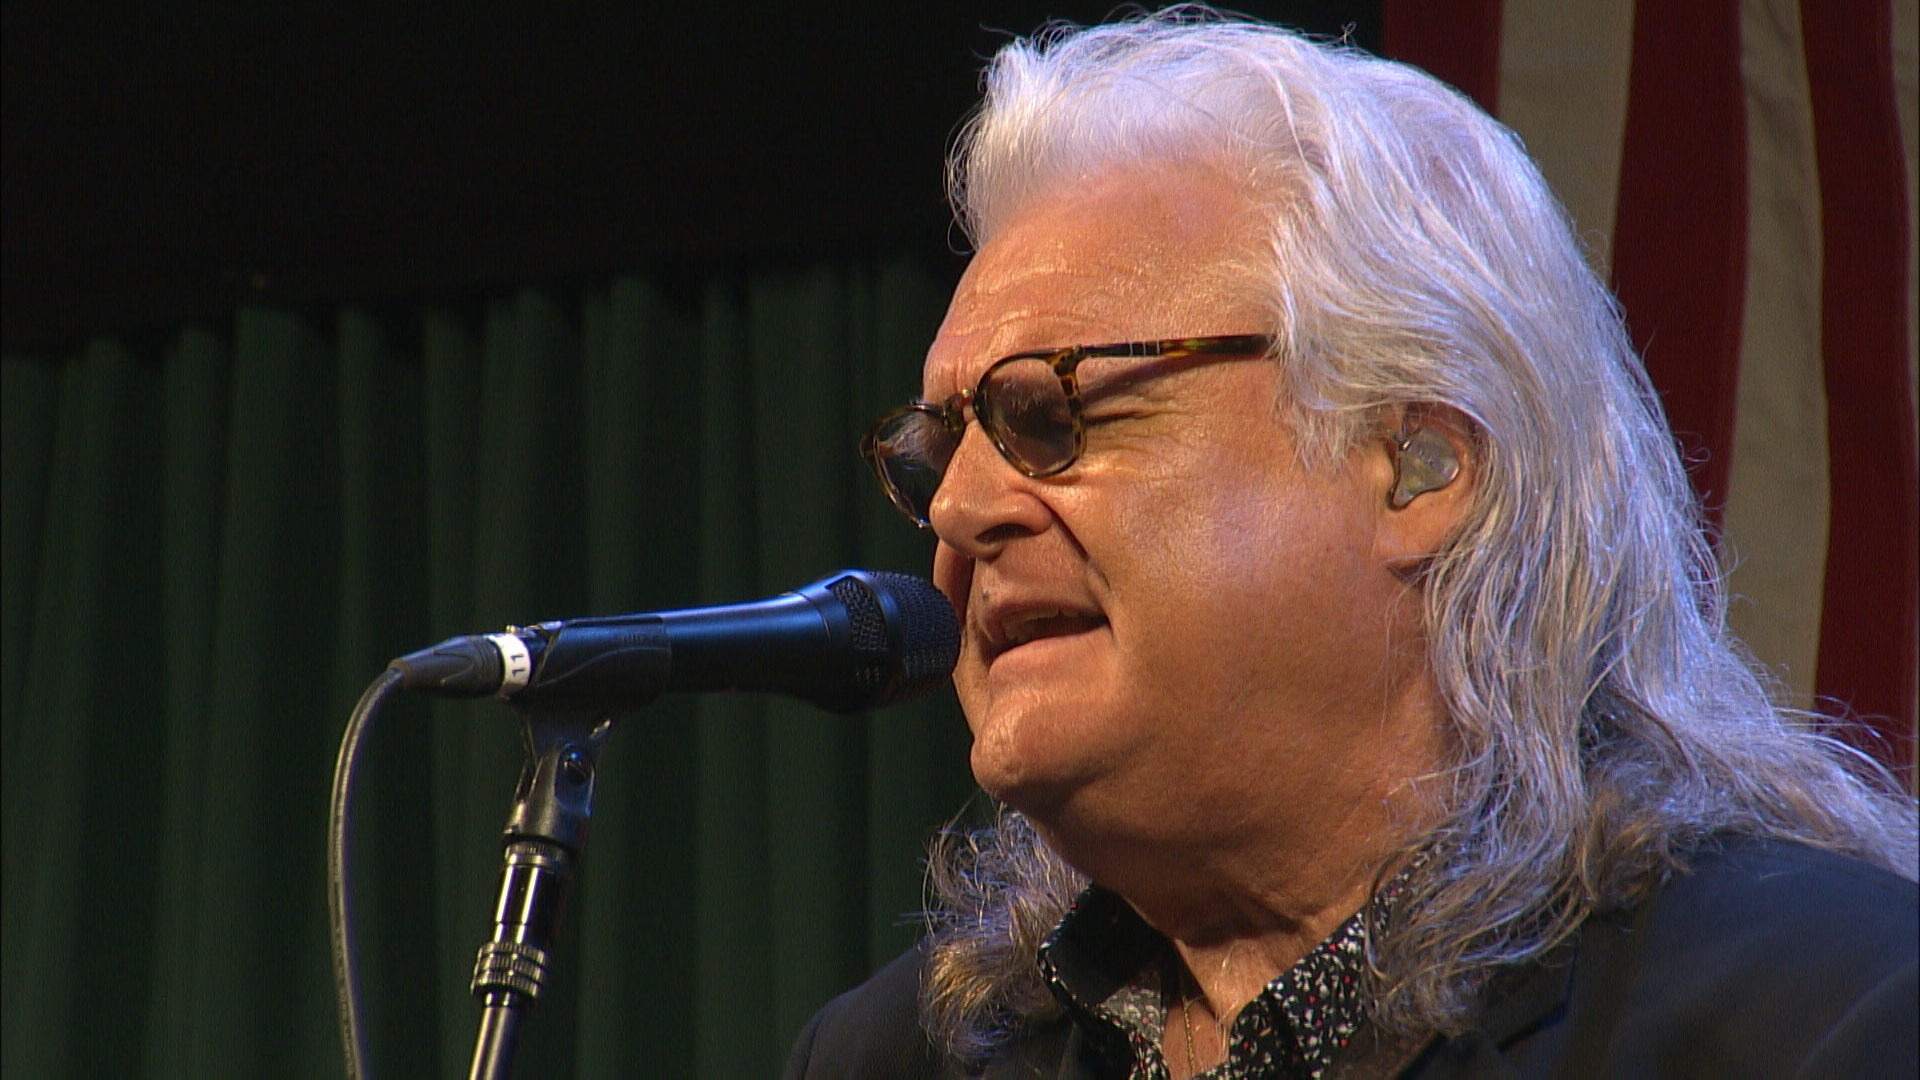 Ricky Skaggs performing on the main stage.